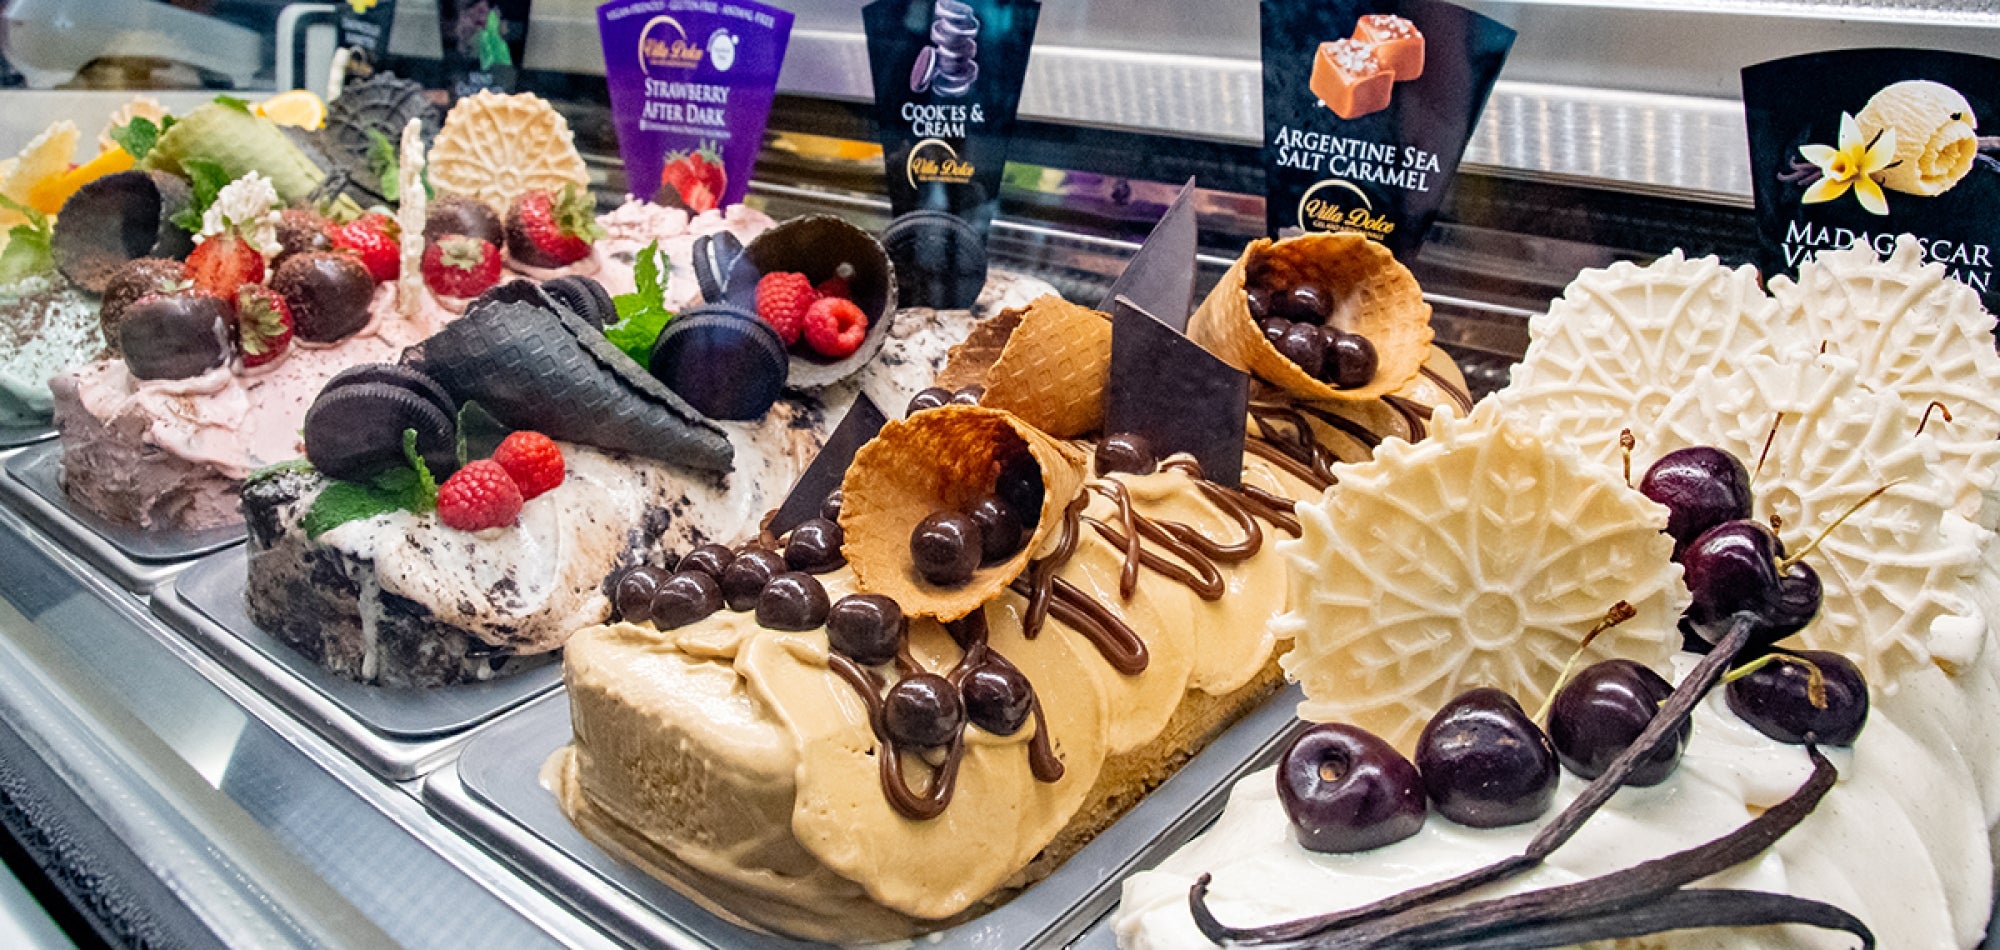 Image of gelato and fresh fruits in the Thunderbird Care display